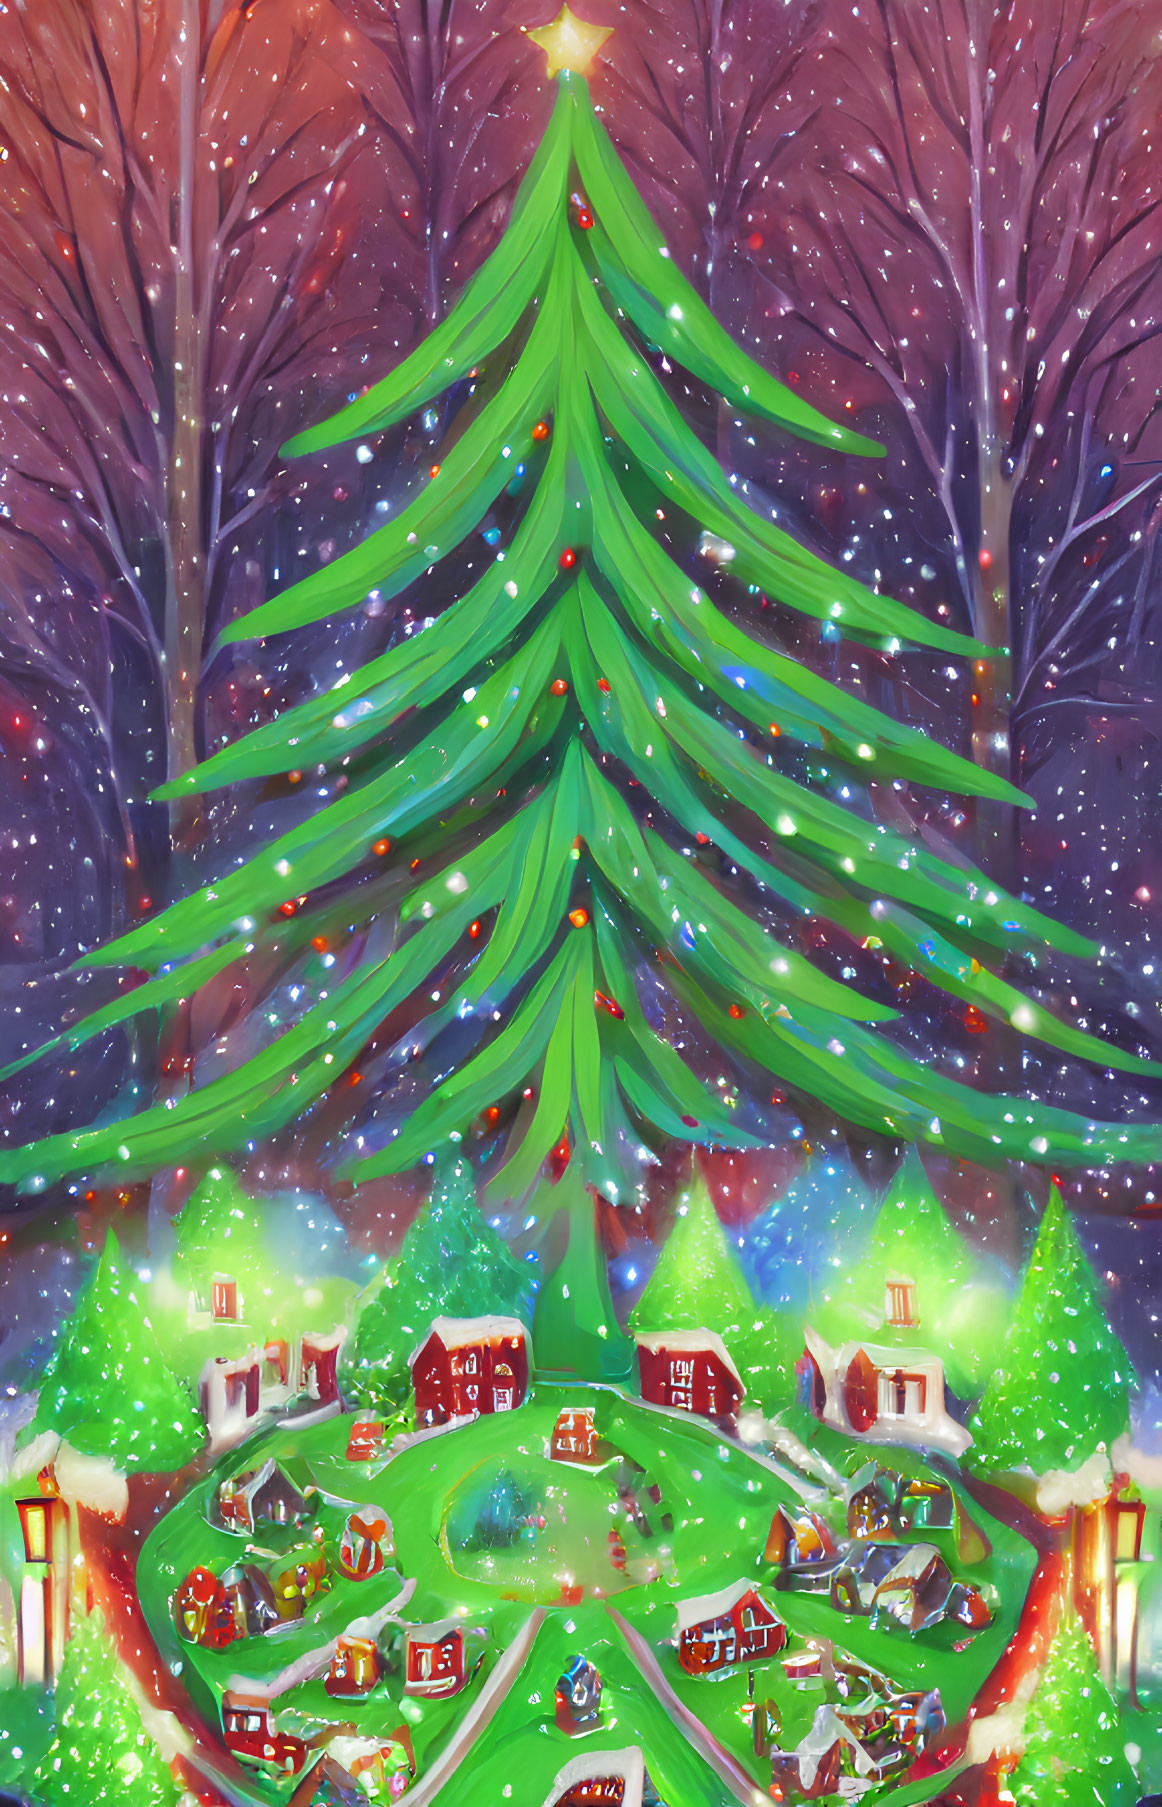 Colorful Christmas village scene with decorated trees and falling snowflakes